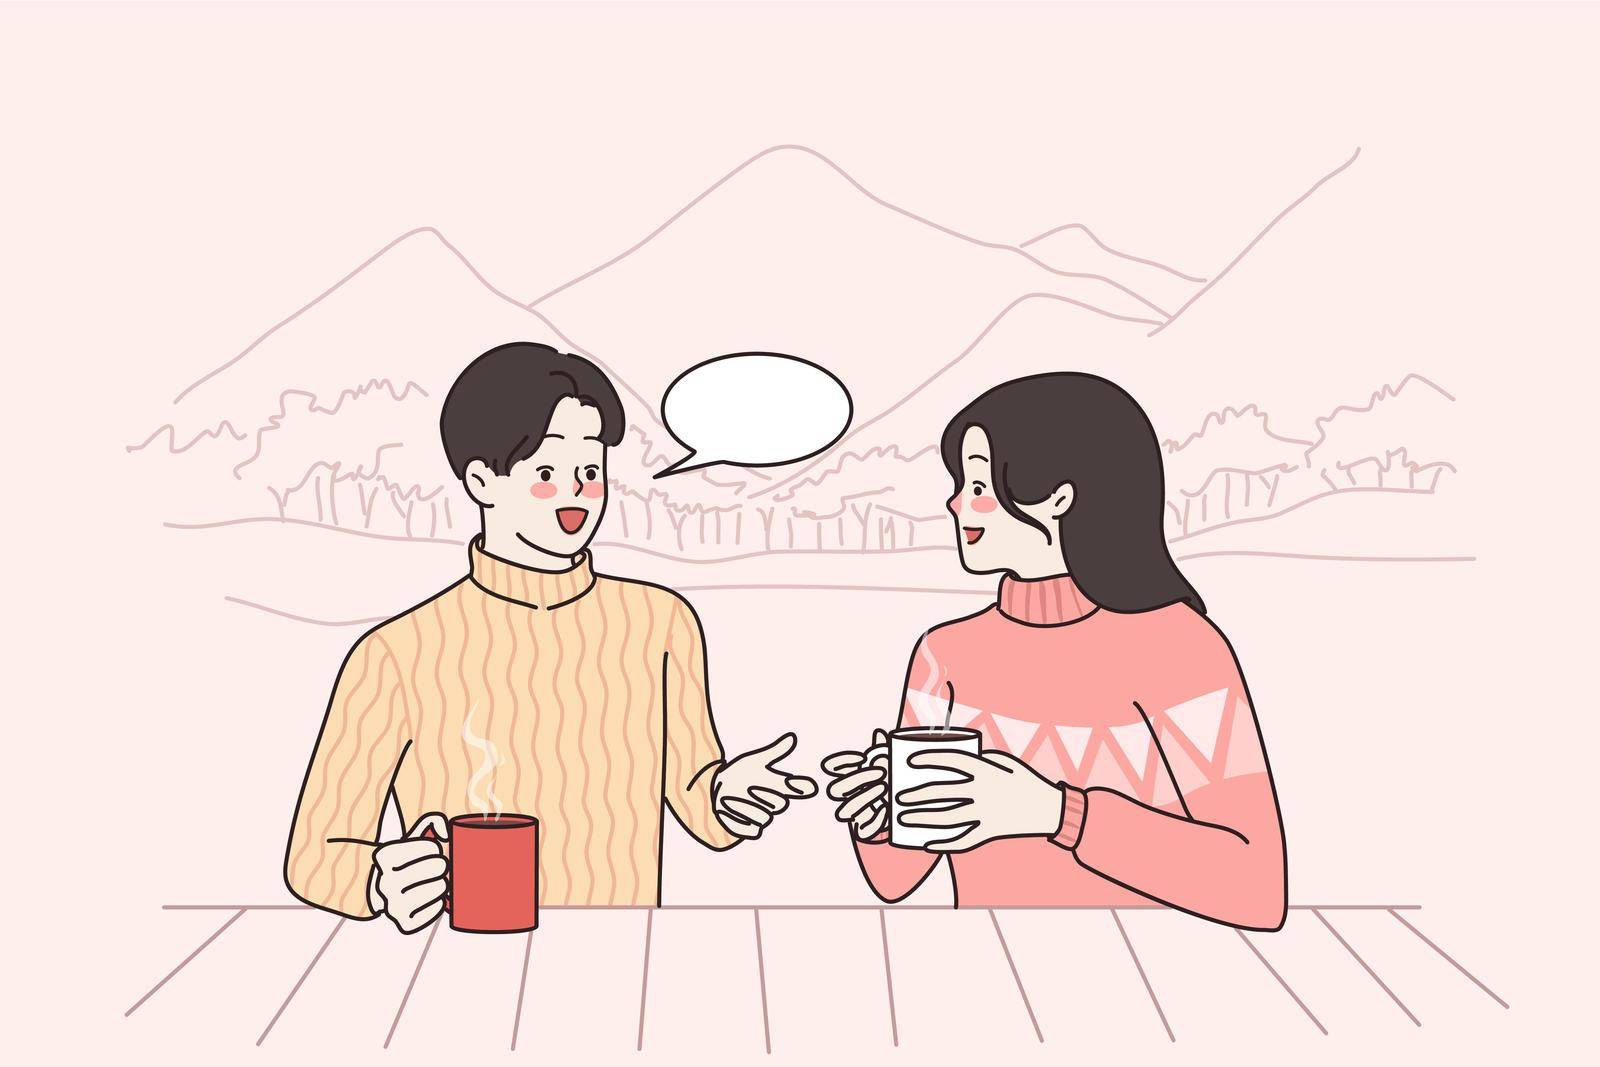 Winter leisure activities and communication concept. Young happy couple man and woman cartoon characters sitting drinking coffee chatting during snowboarding n mountains vector illustration